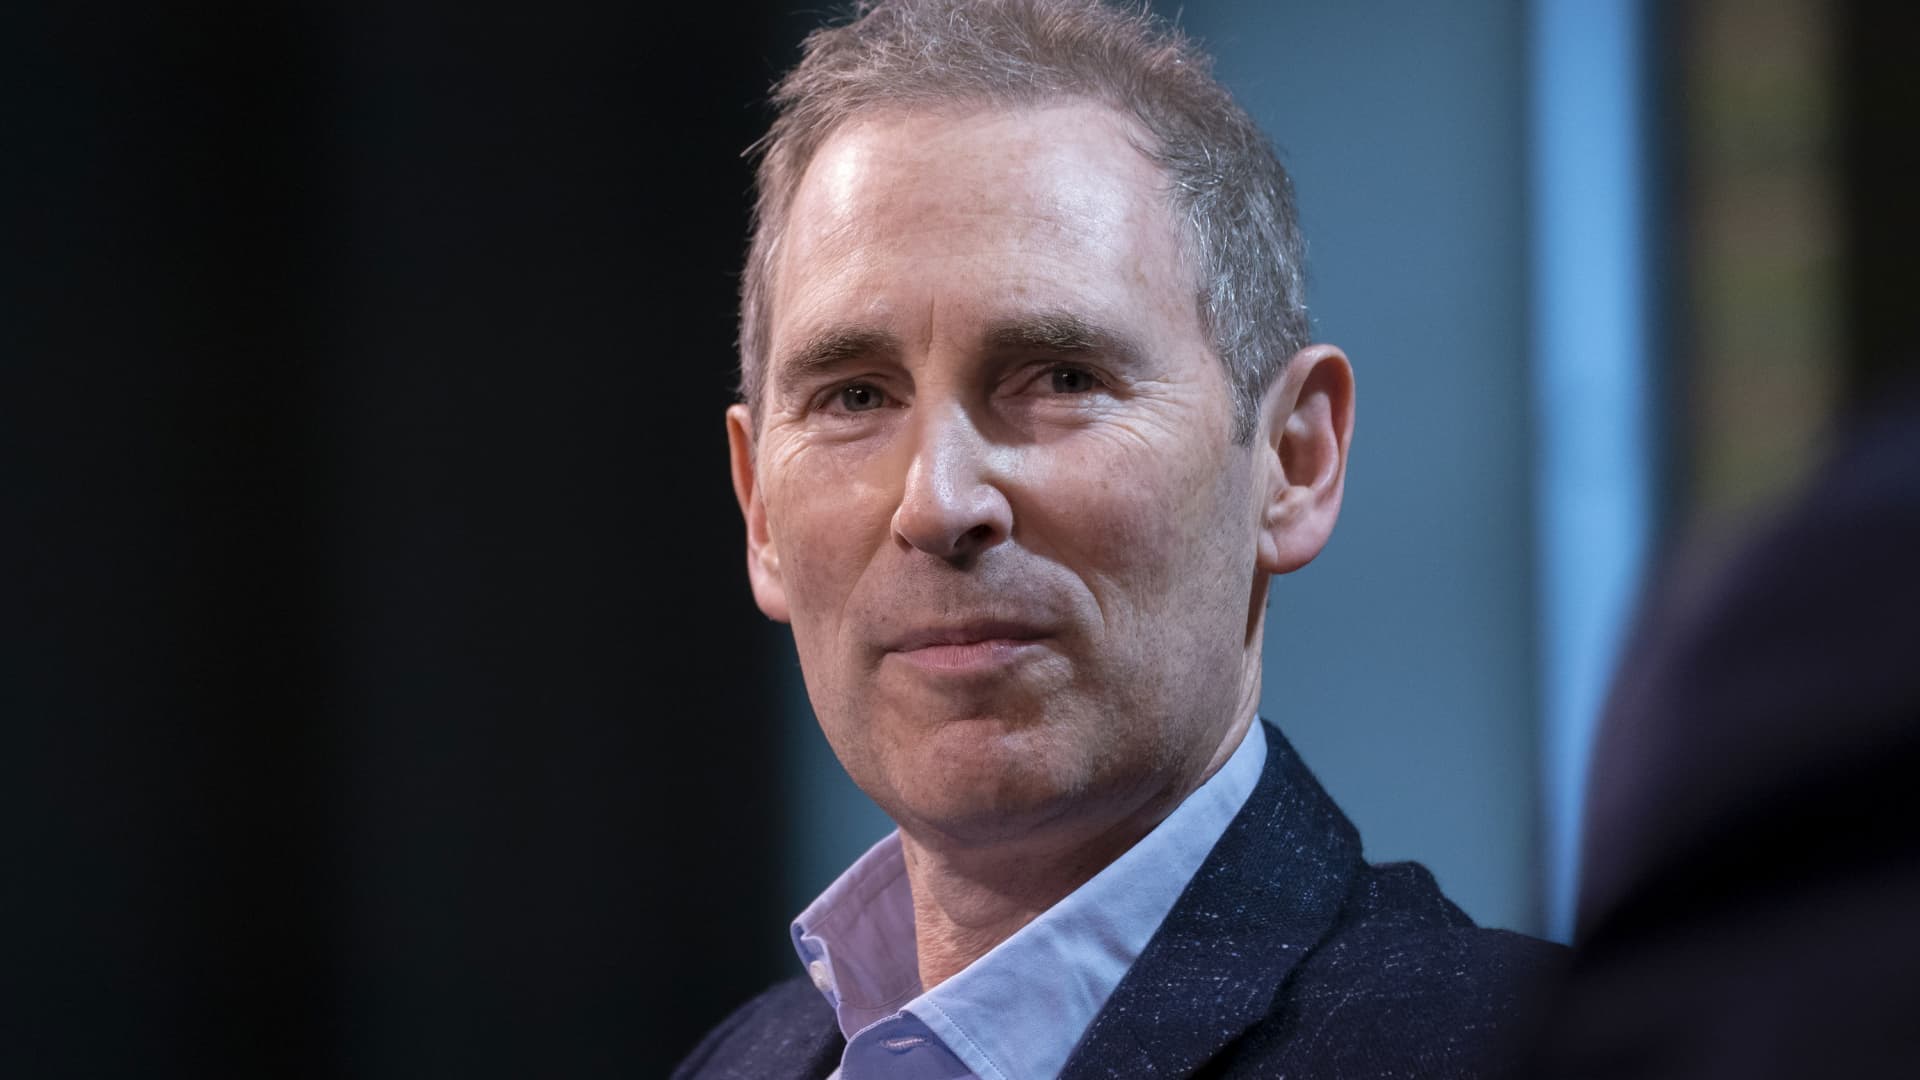 Andy Jassy just wrapped up a rocky first year after succeeding Bezos as Amazon CEO